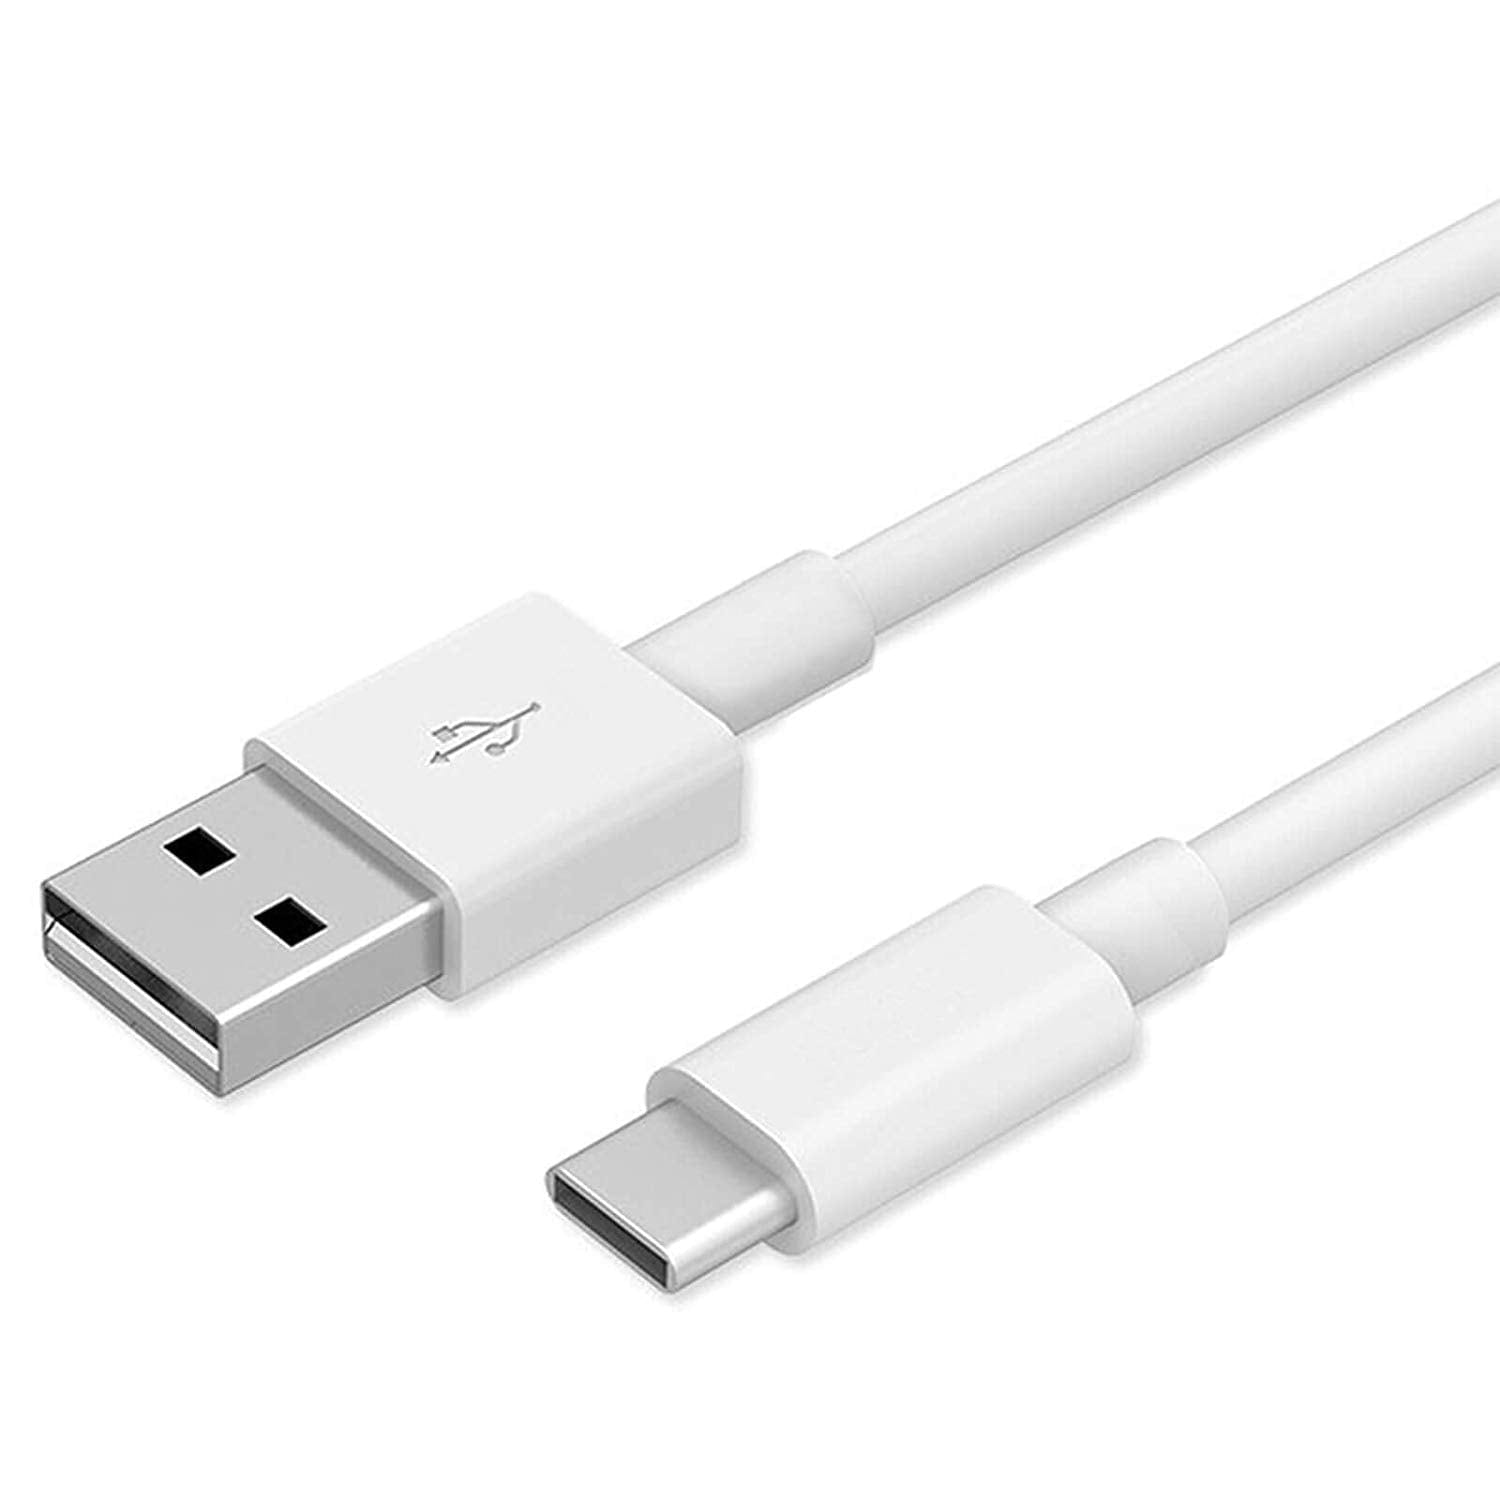 Samsung Galaxy A20e USB to Type C Charging Cable In Car White - 50 CM Short - SmartPhoneGadgetUK